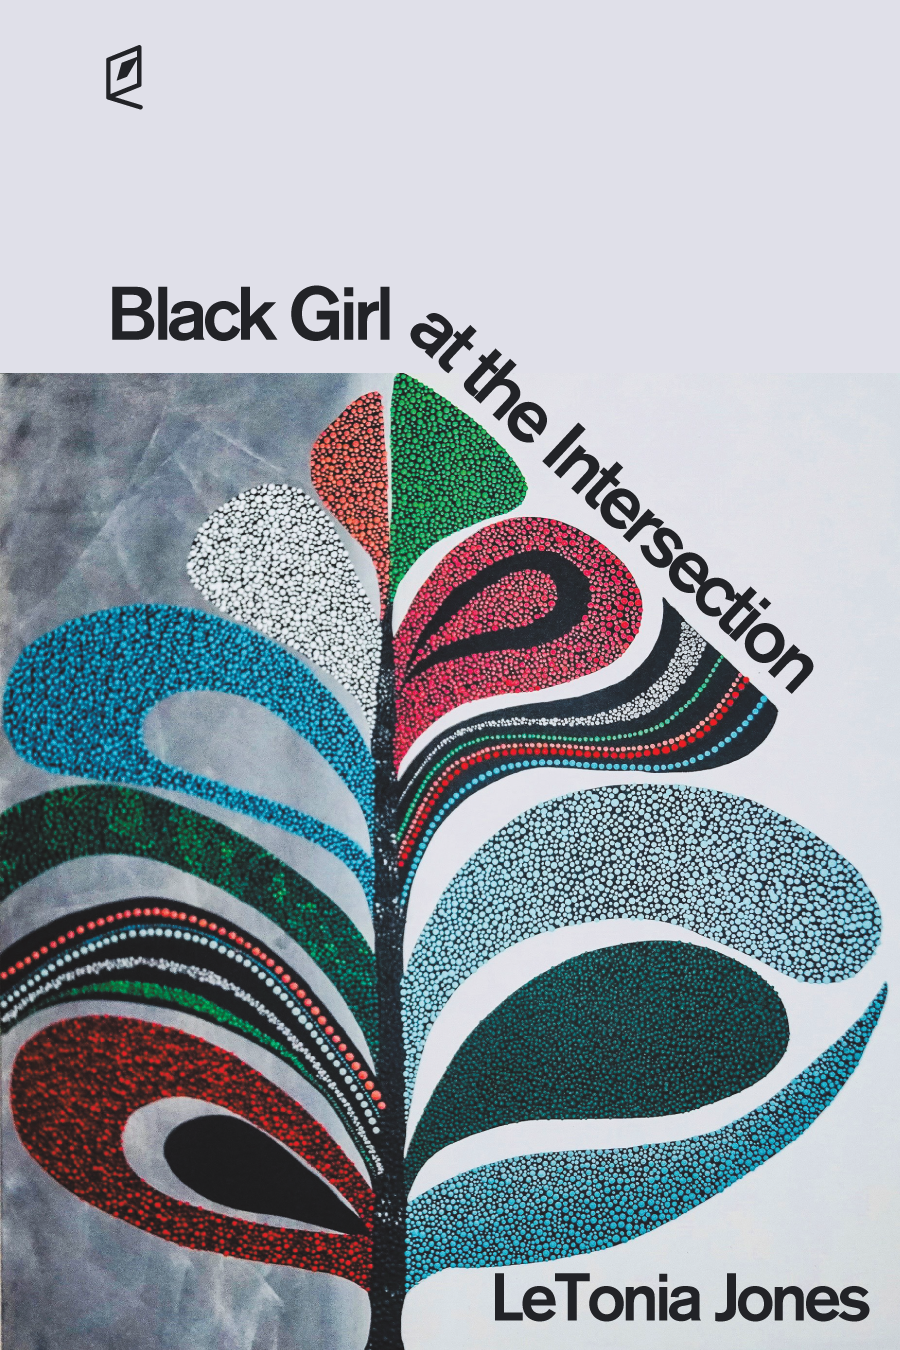 LeTonia Jones to Participate in the Kentucky Book Festival with “Black Girl at the Intersection”